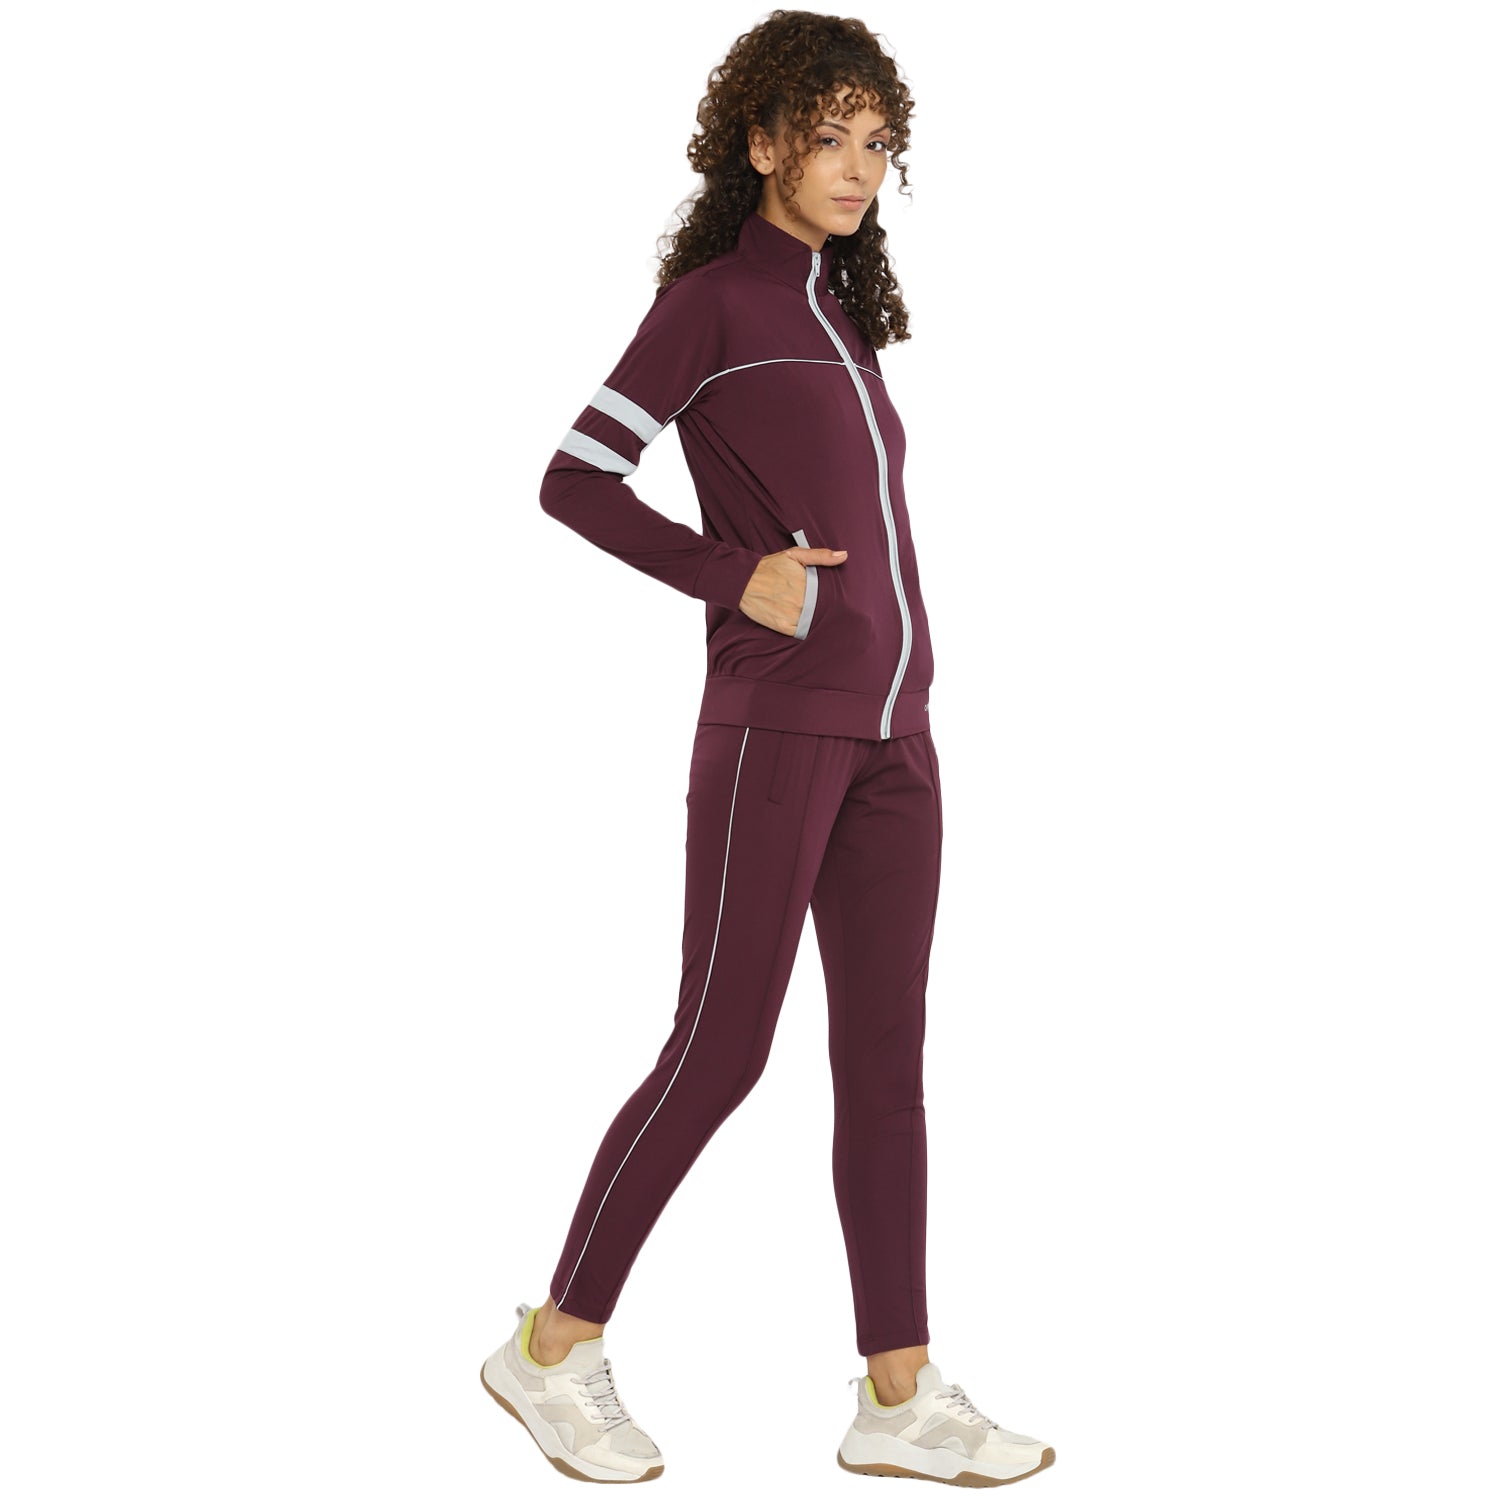 WMN ZL PIPING CNS TS Women Track Suits